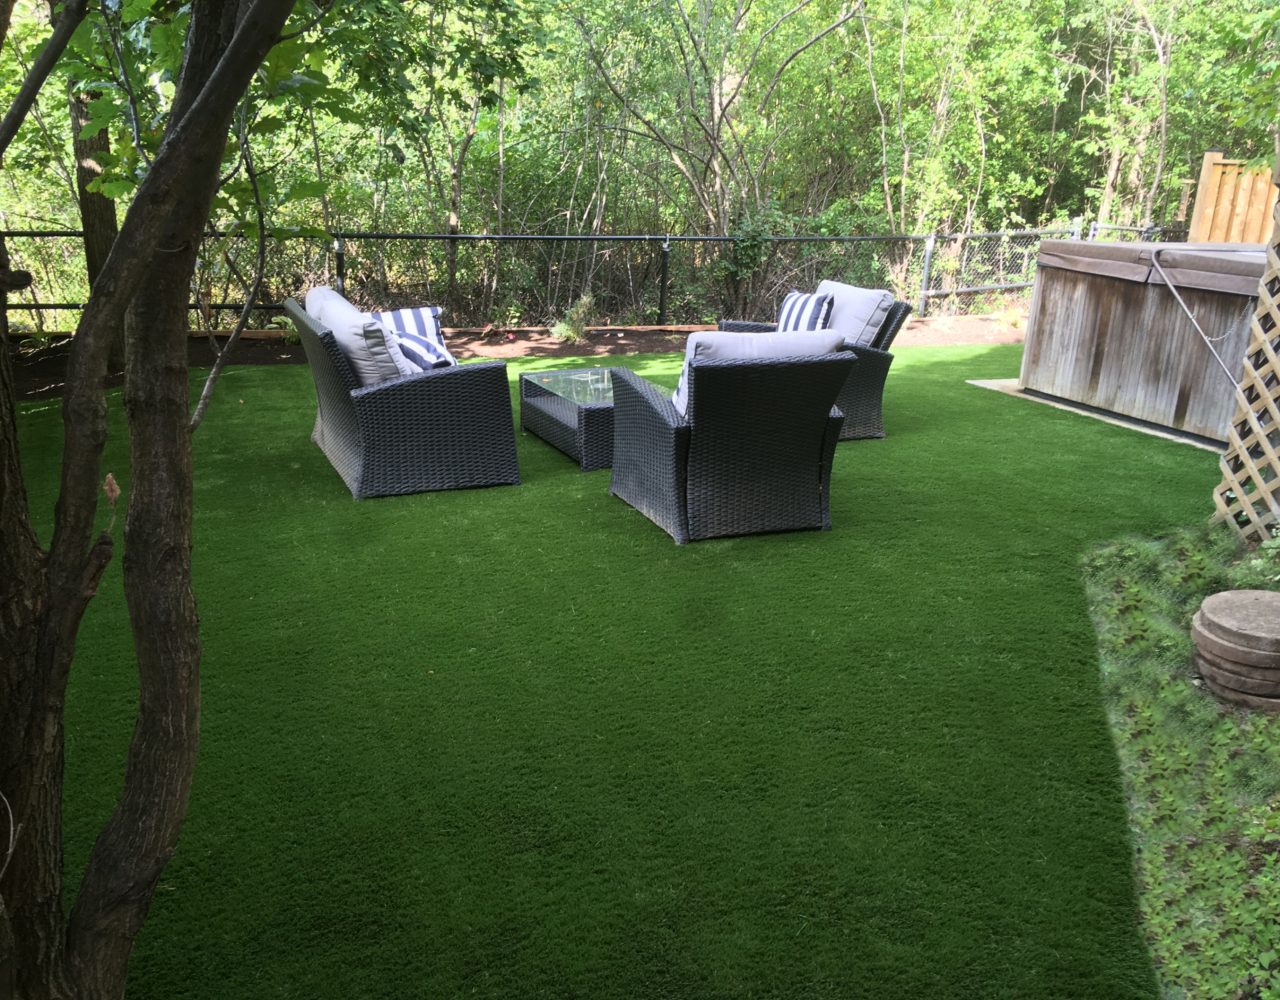 Get the patio chairs out on synthetic turf